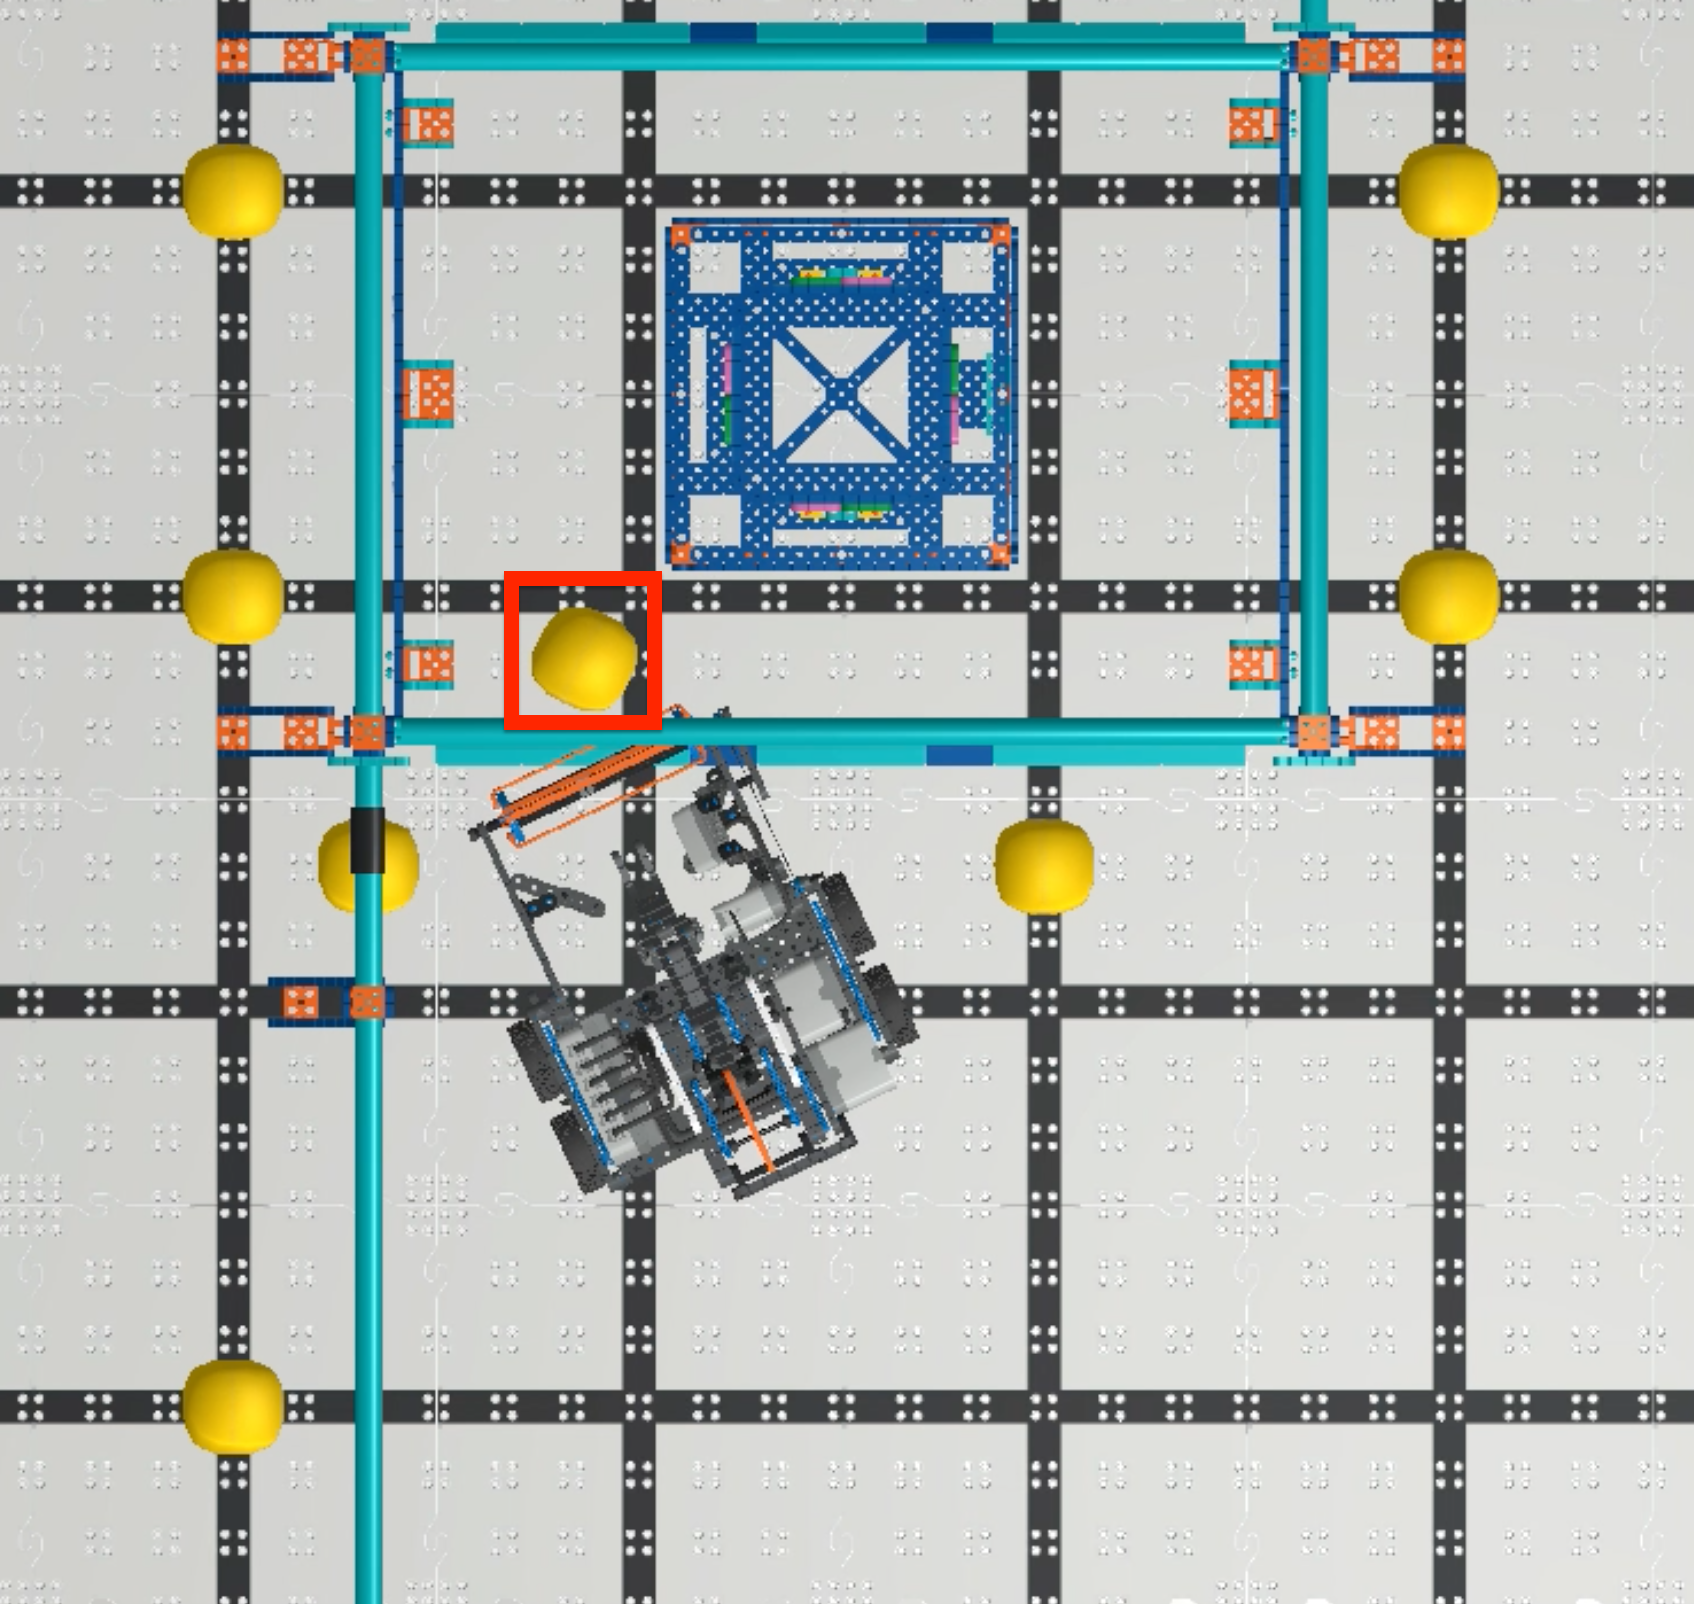 the robot pushes the ball into the goal successfully